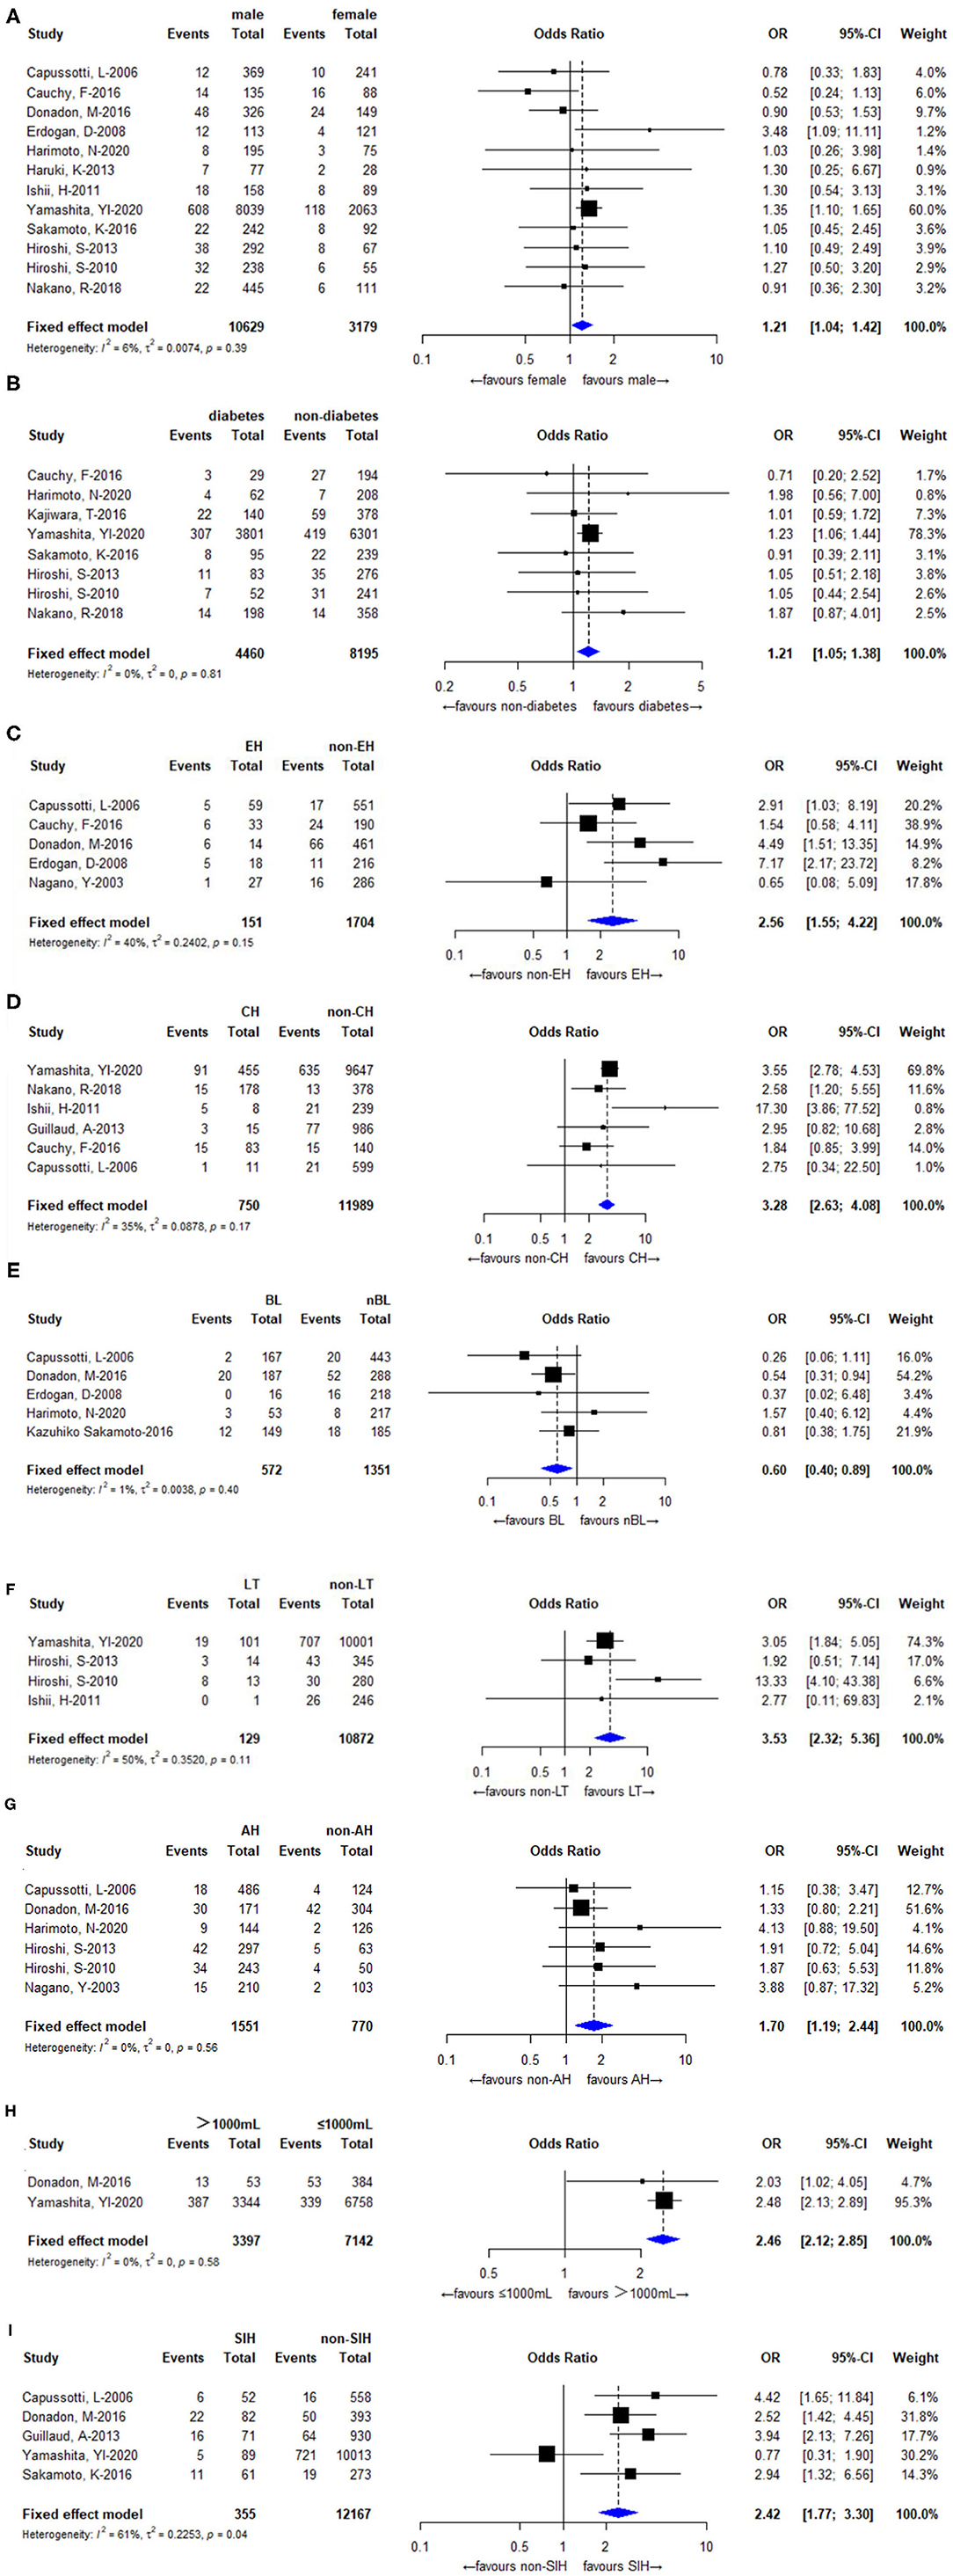 Frontiers Meta Analysis Of Risk Factors For Bile Leakage After 0371